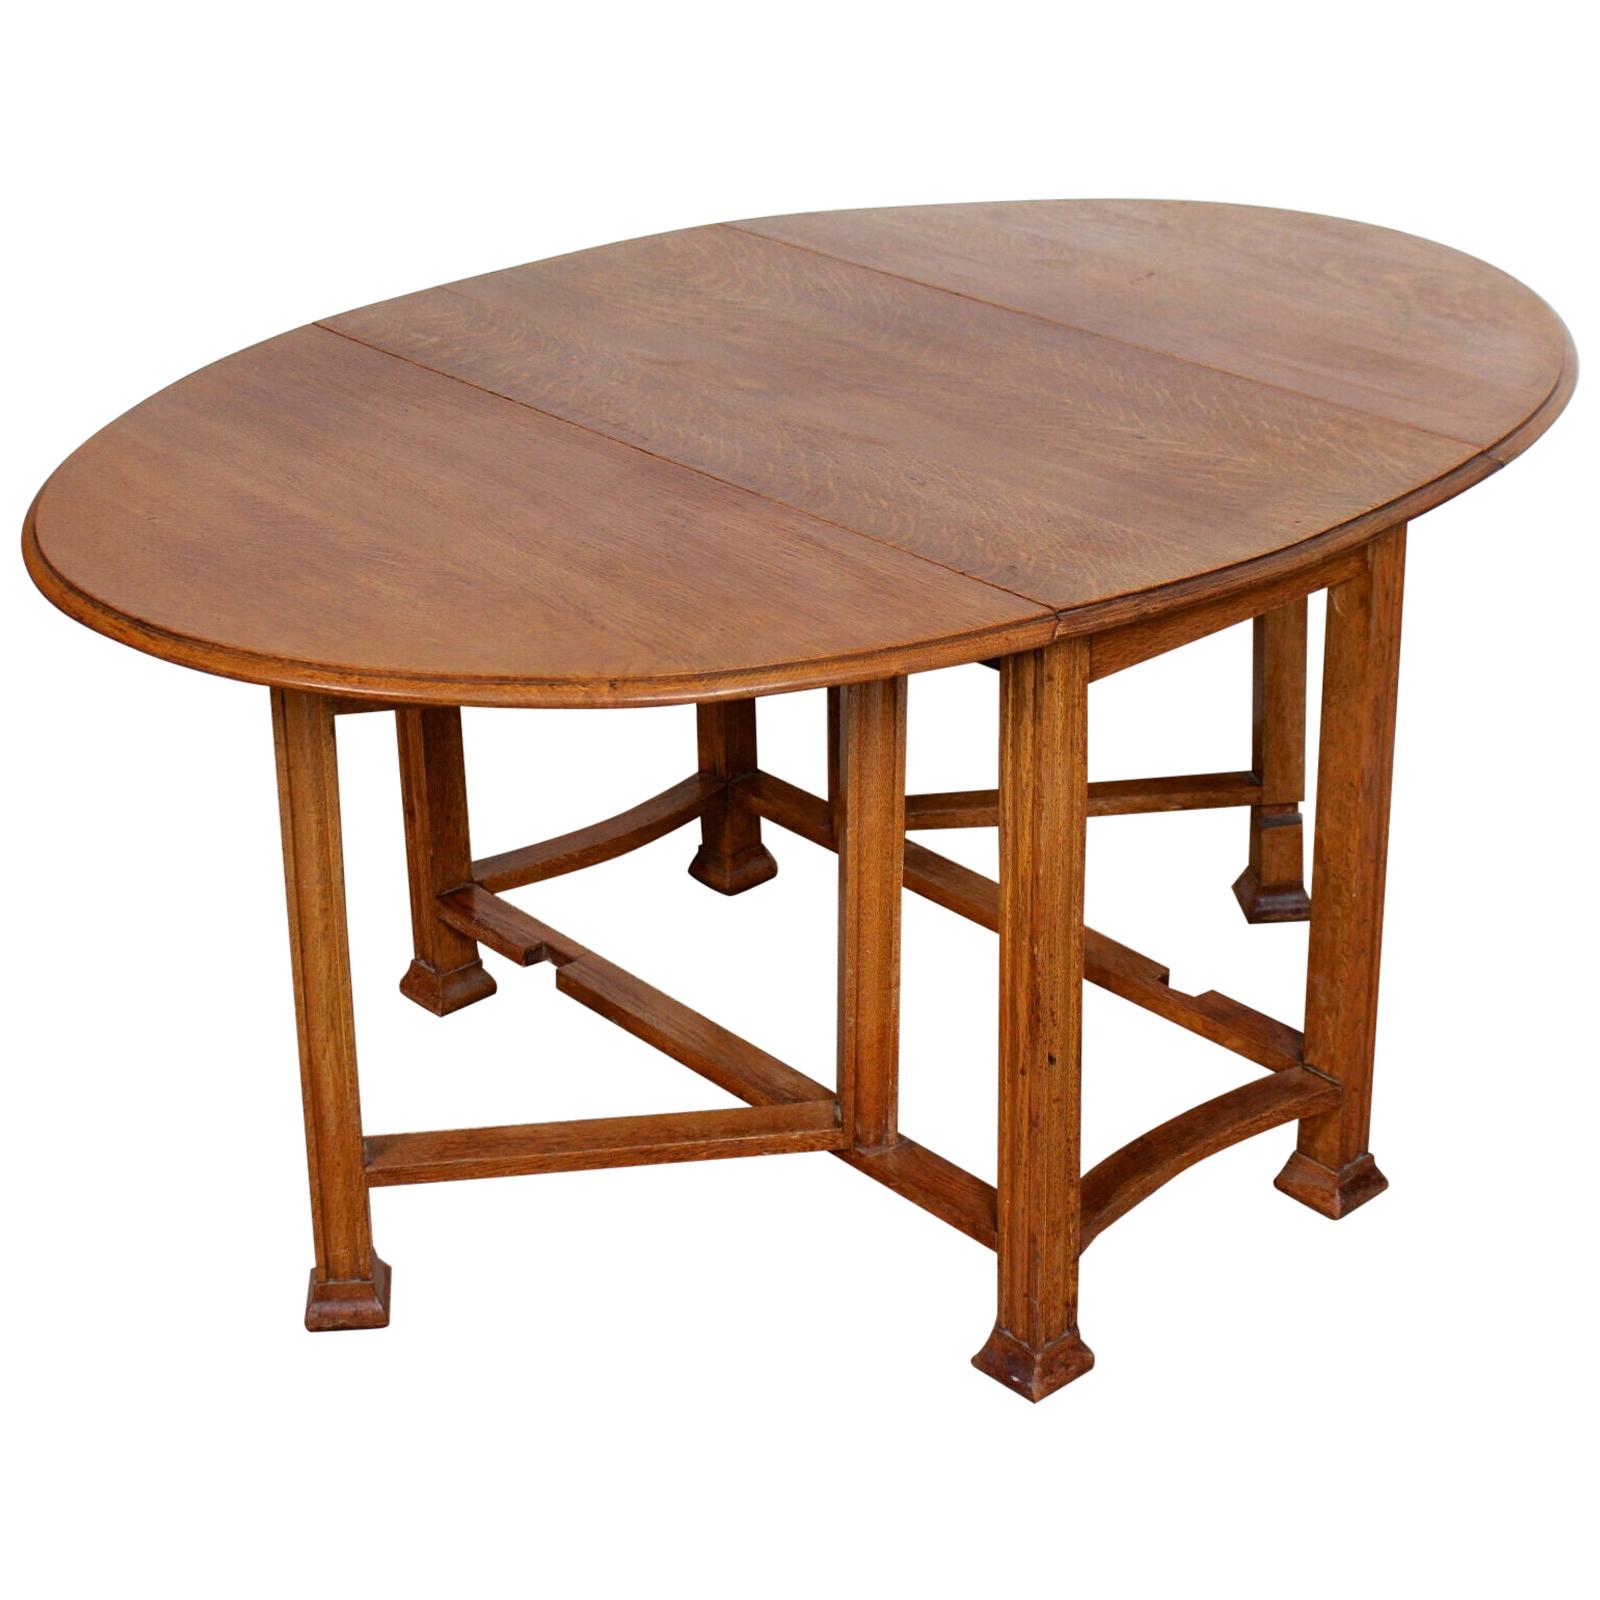 English Oak Gateleg Dining Table Carved Solid Folding Kitchen Table For Sale